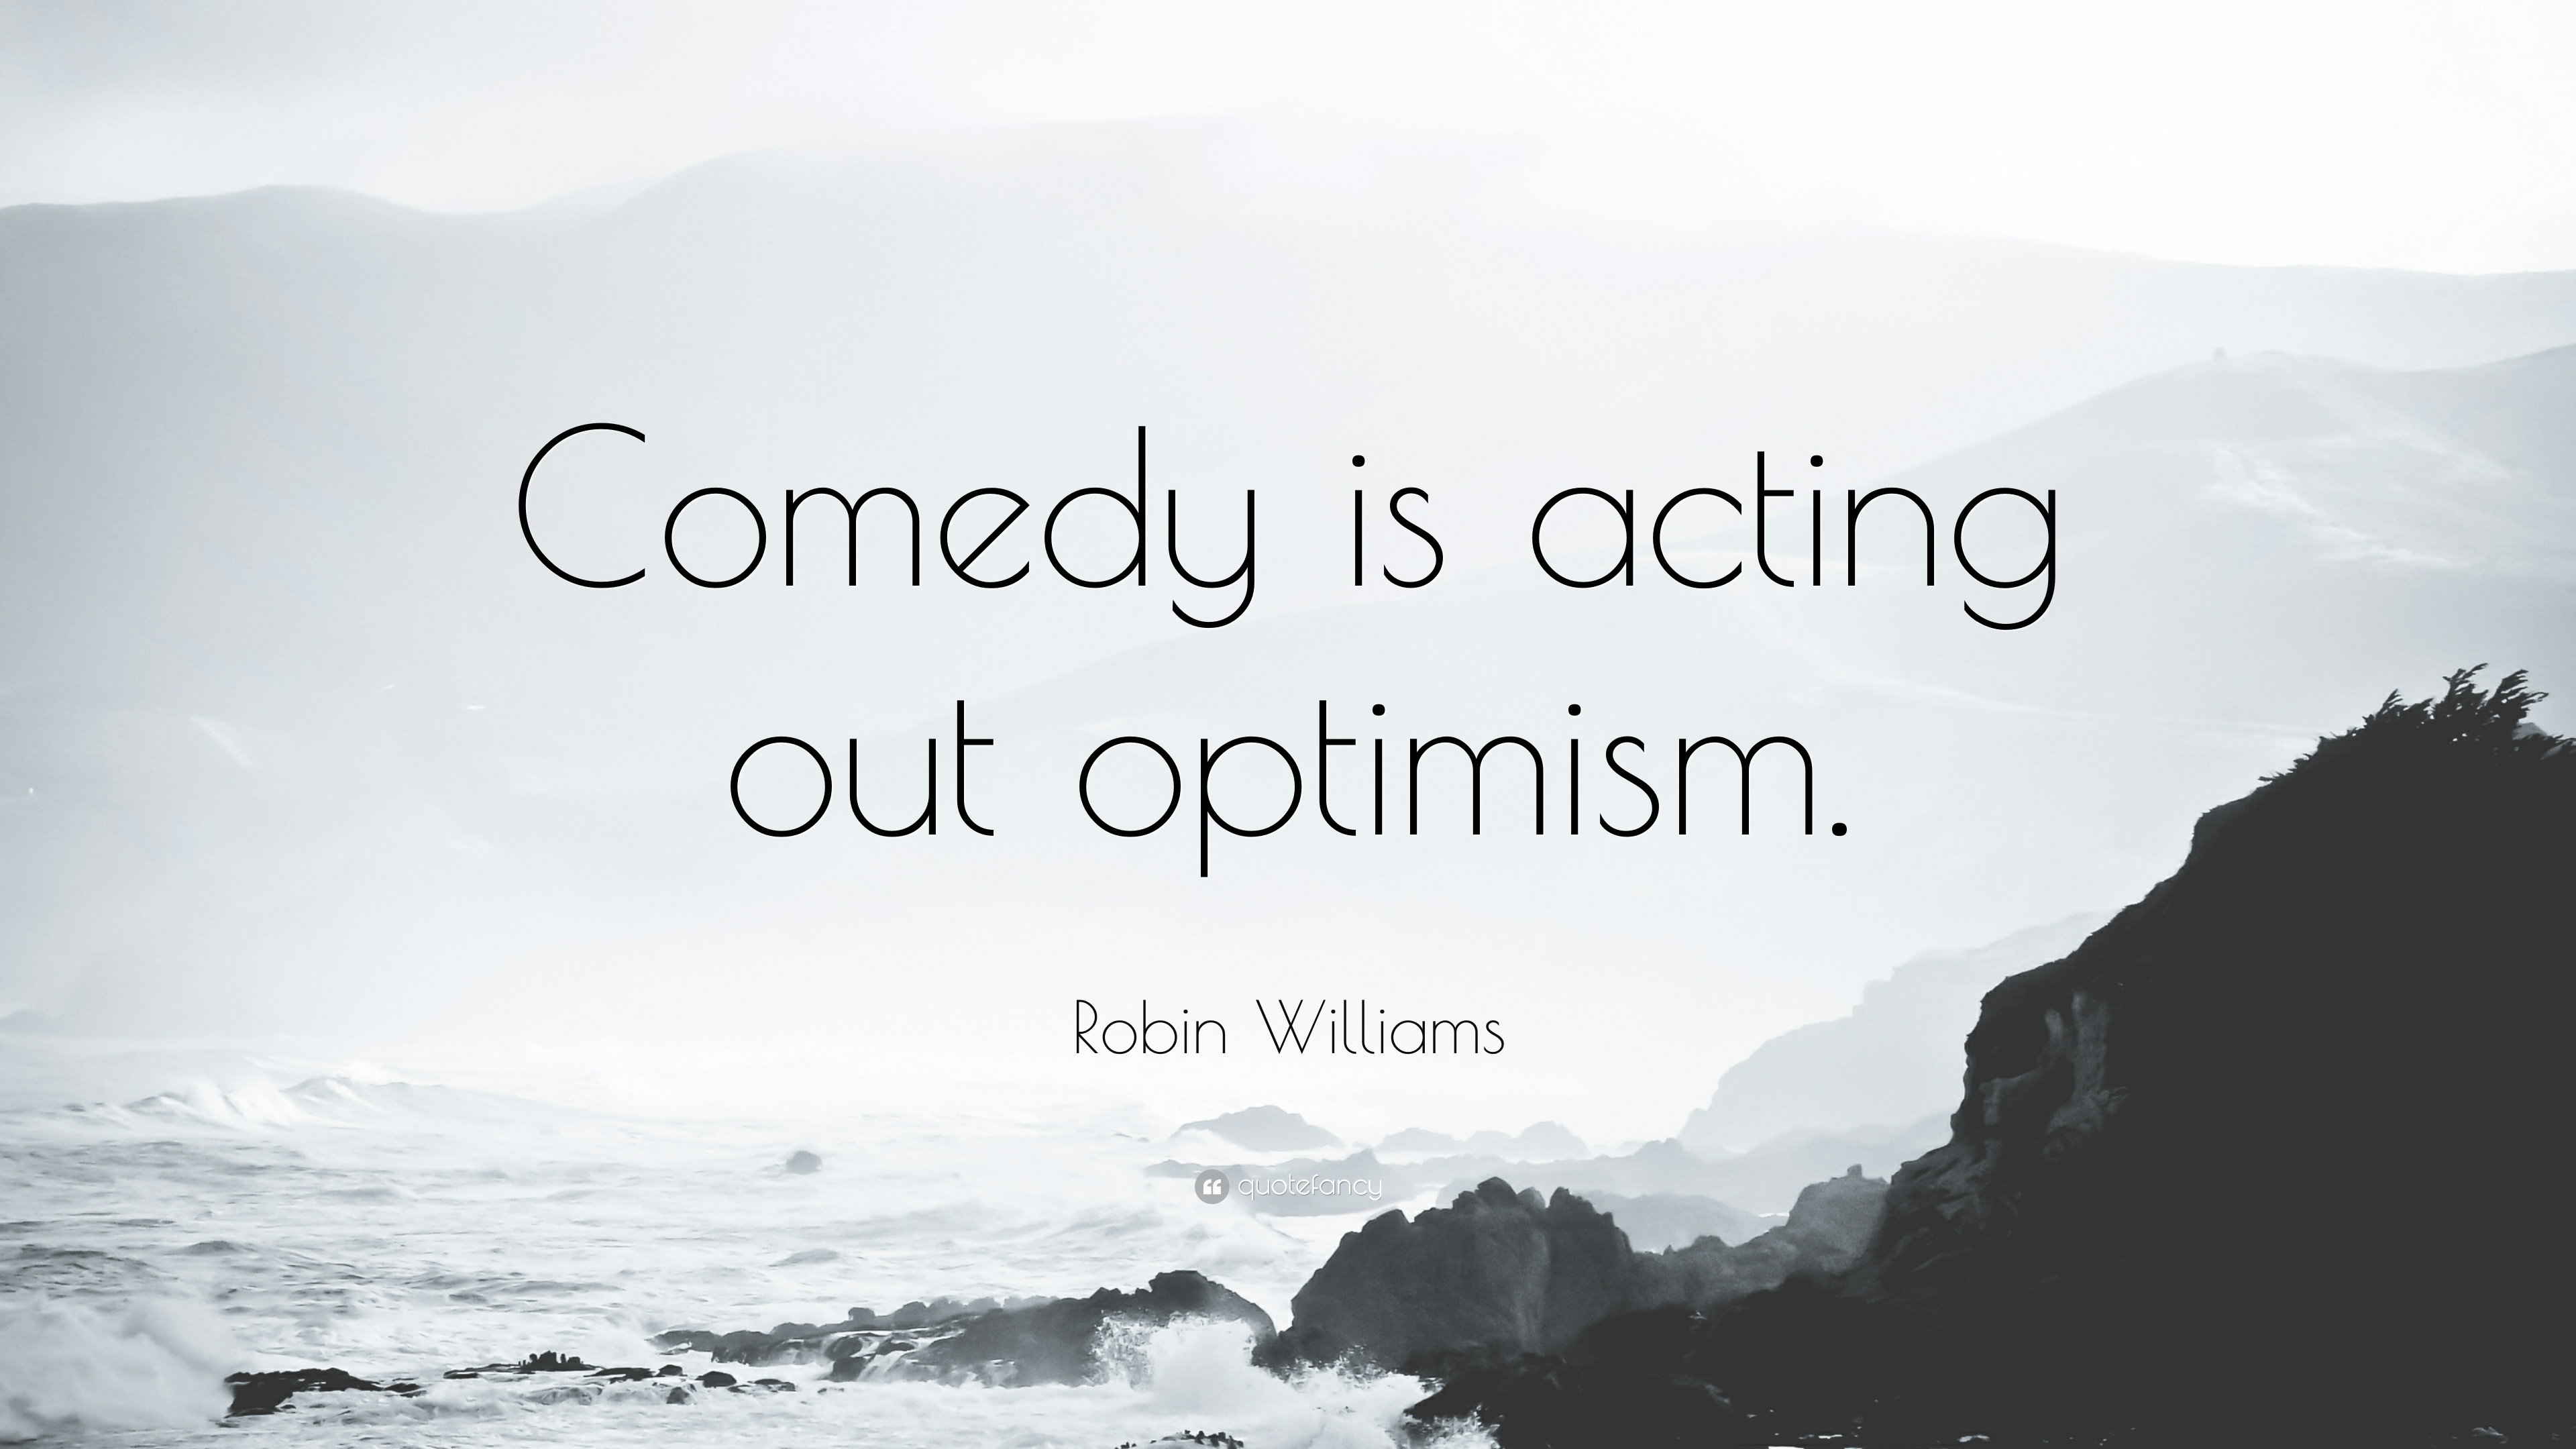 Robin Williams Quote: “Comedy is acting out optimism.” (3 ...